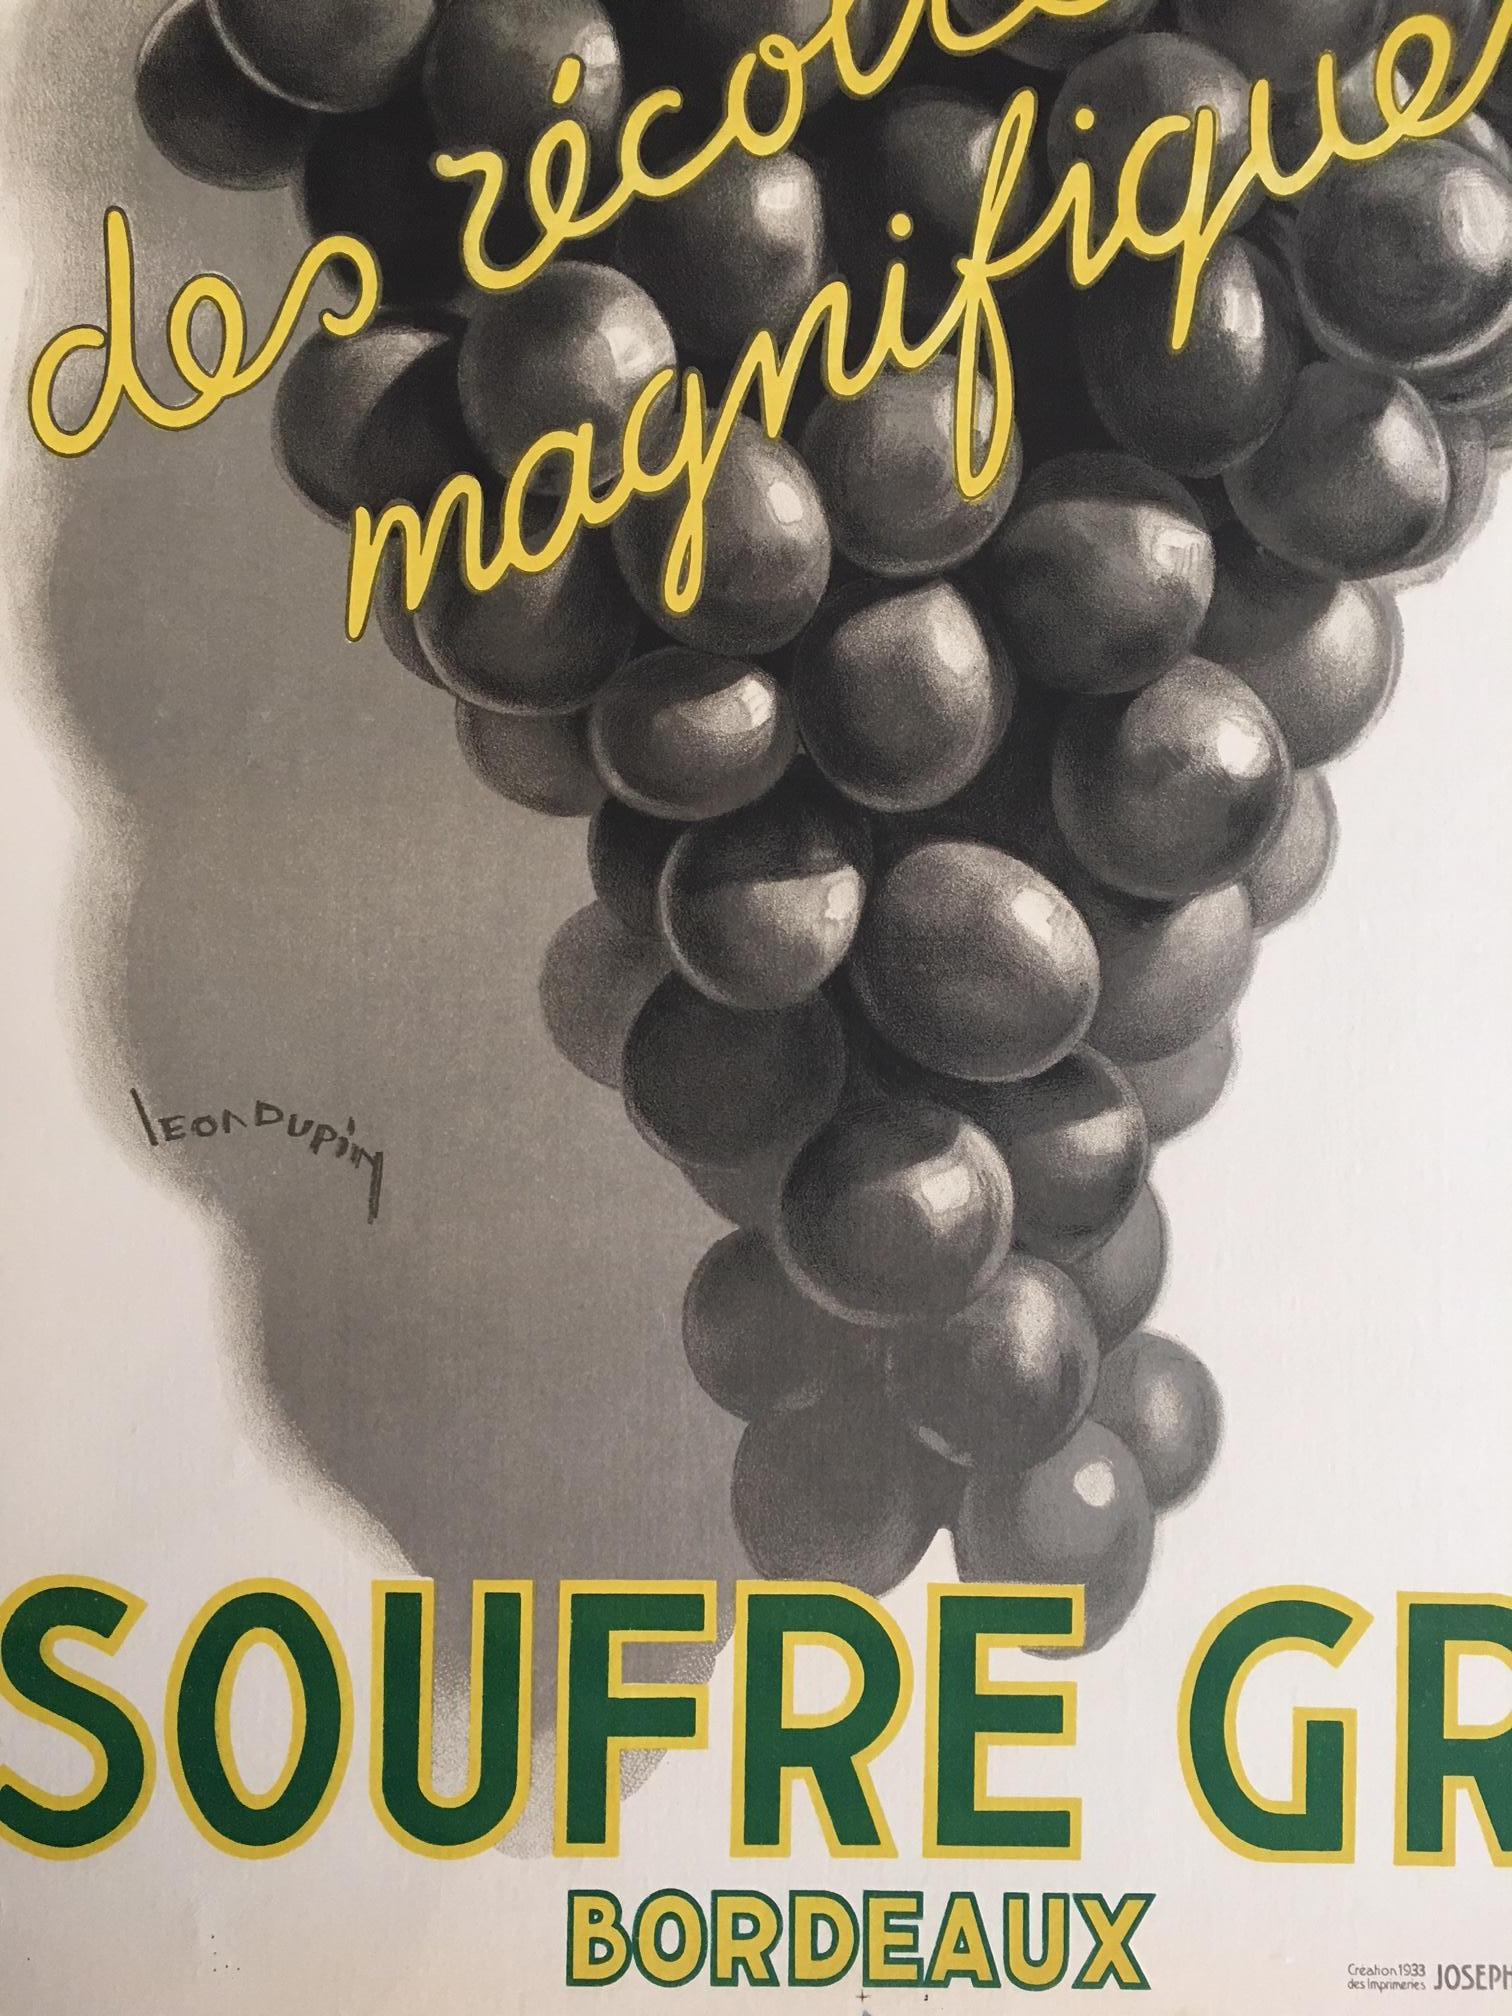 Original Vintage French Art Deco Wine Poster, Soufre Gre, 1933 by Leon Dupin 3